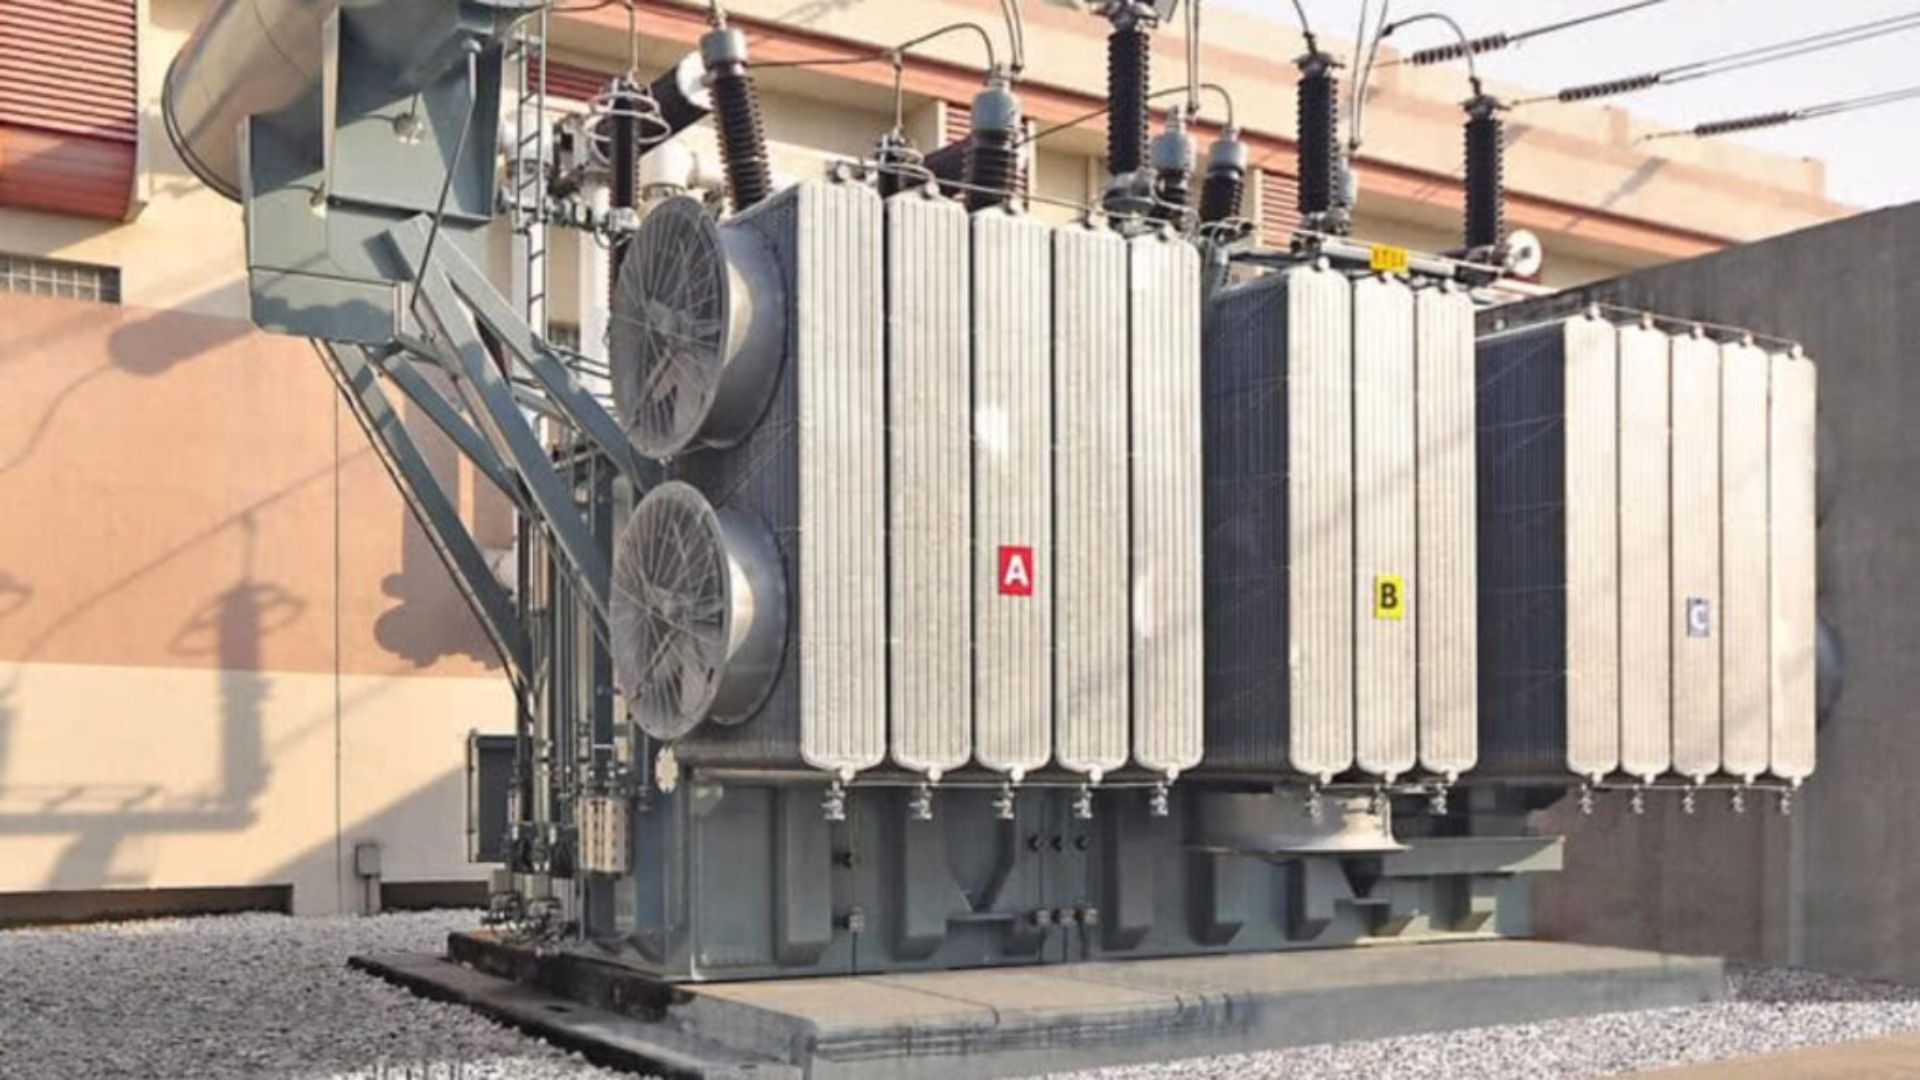 How to Evaluate and Select Transformer Suppliers